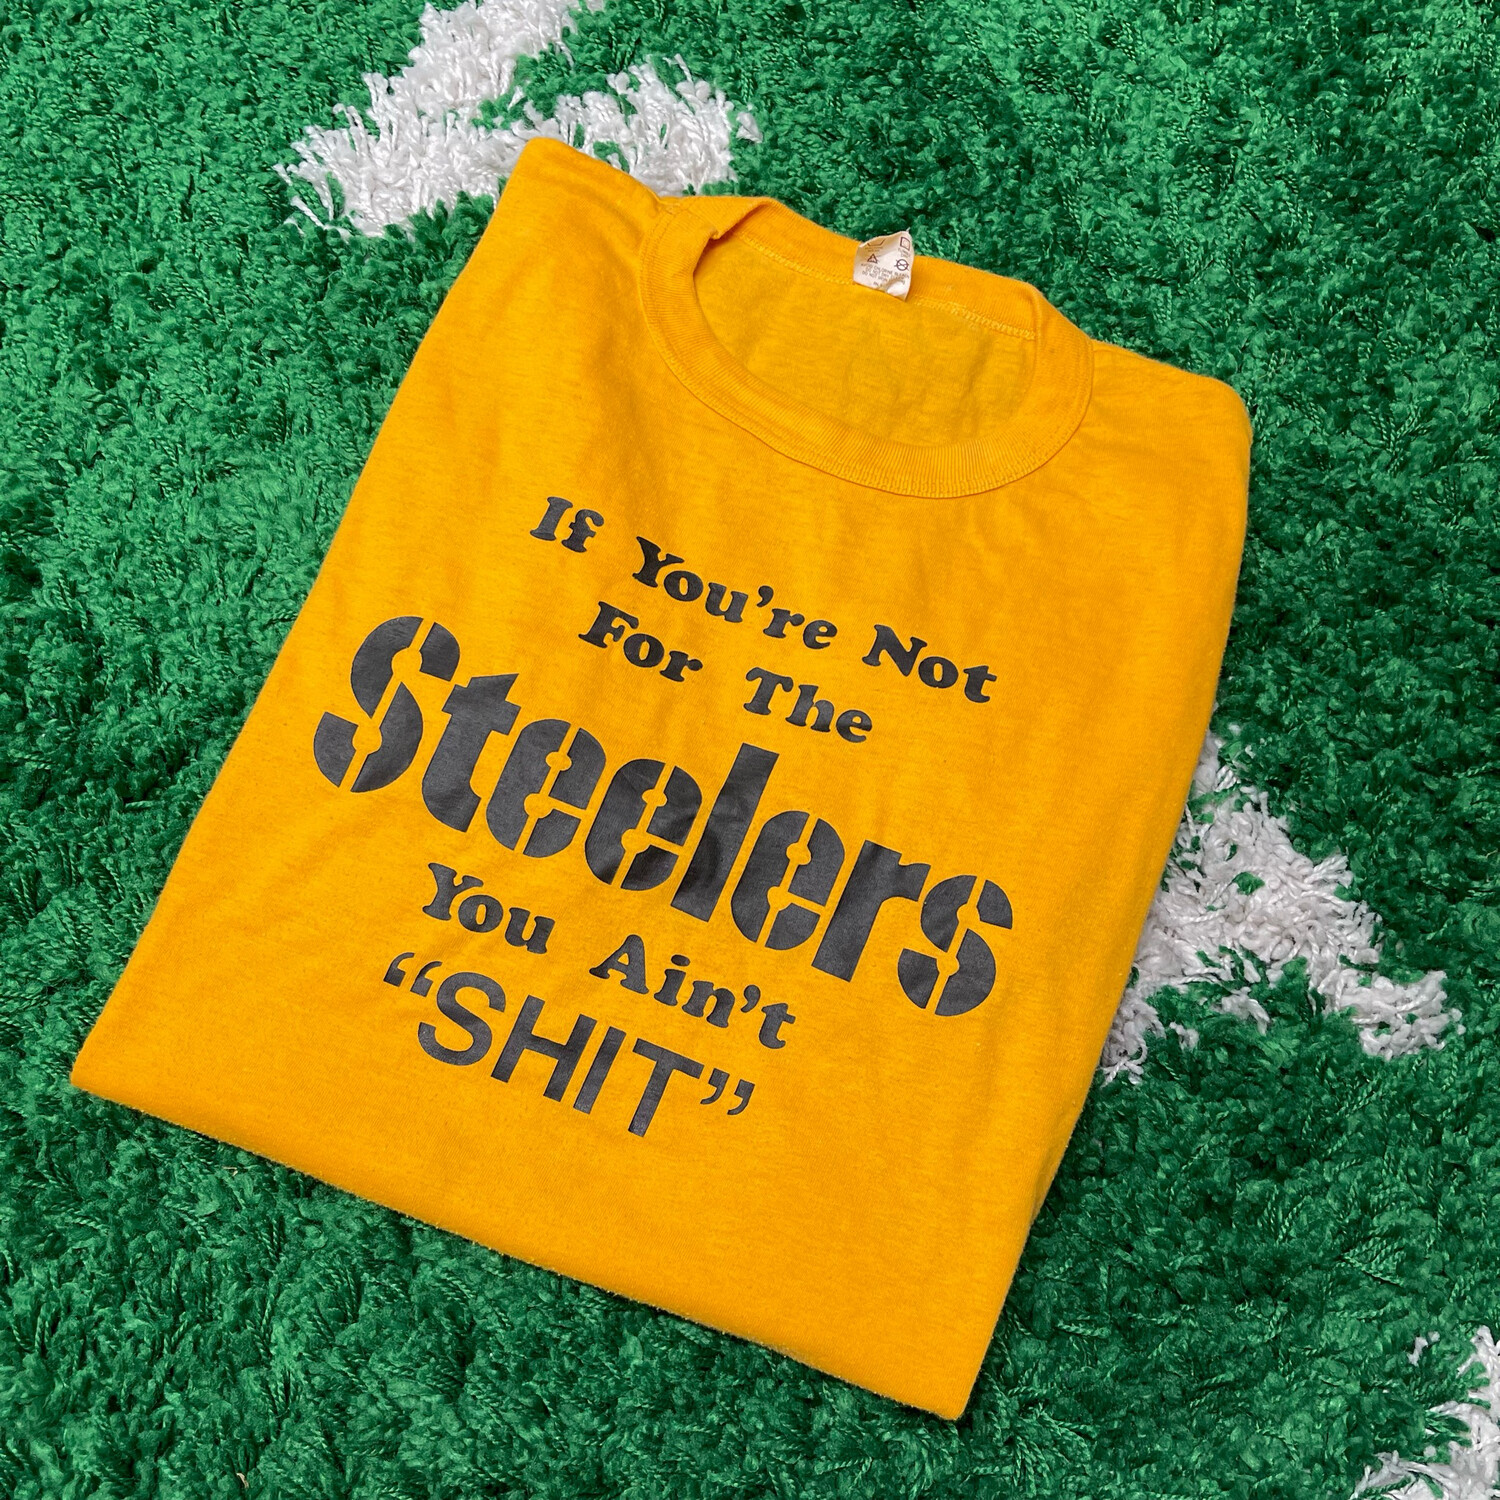 If You're Not For The Steelers Tee Size Medium